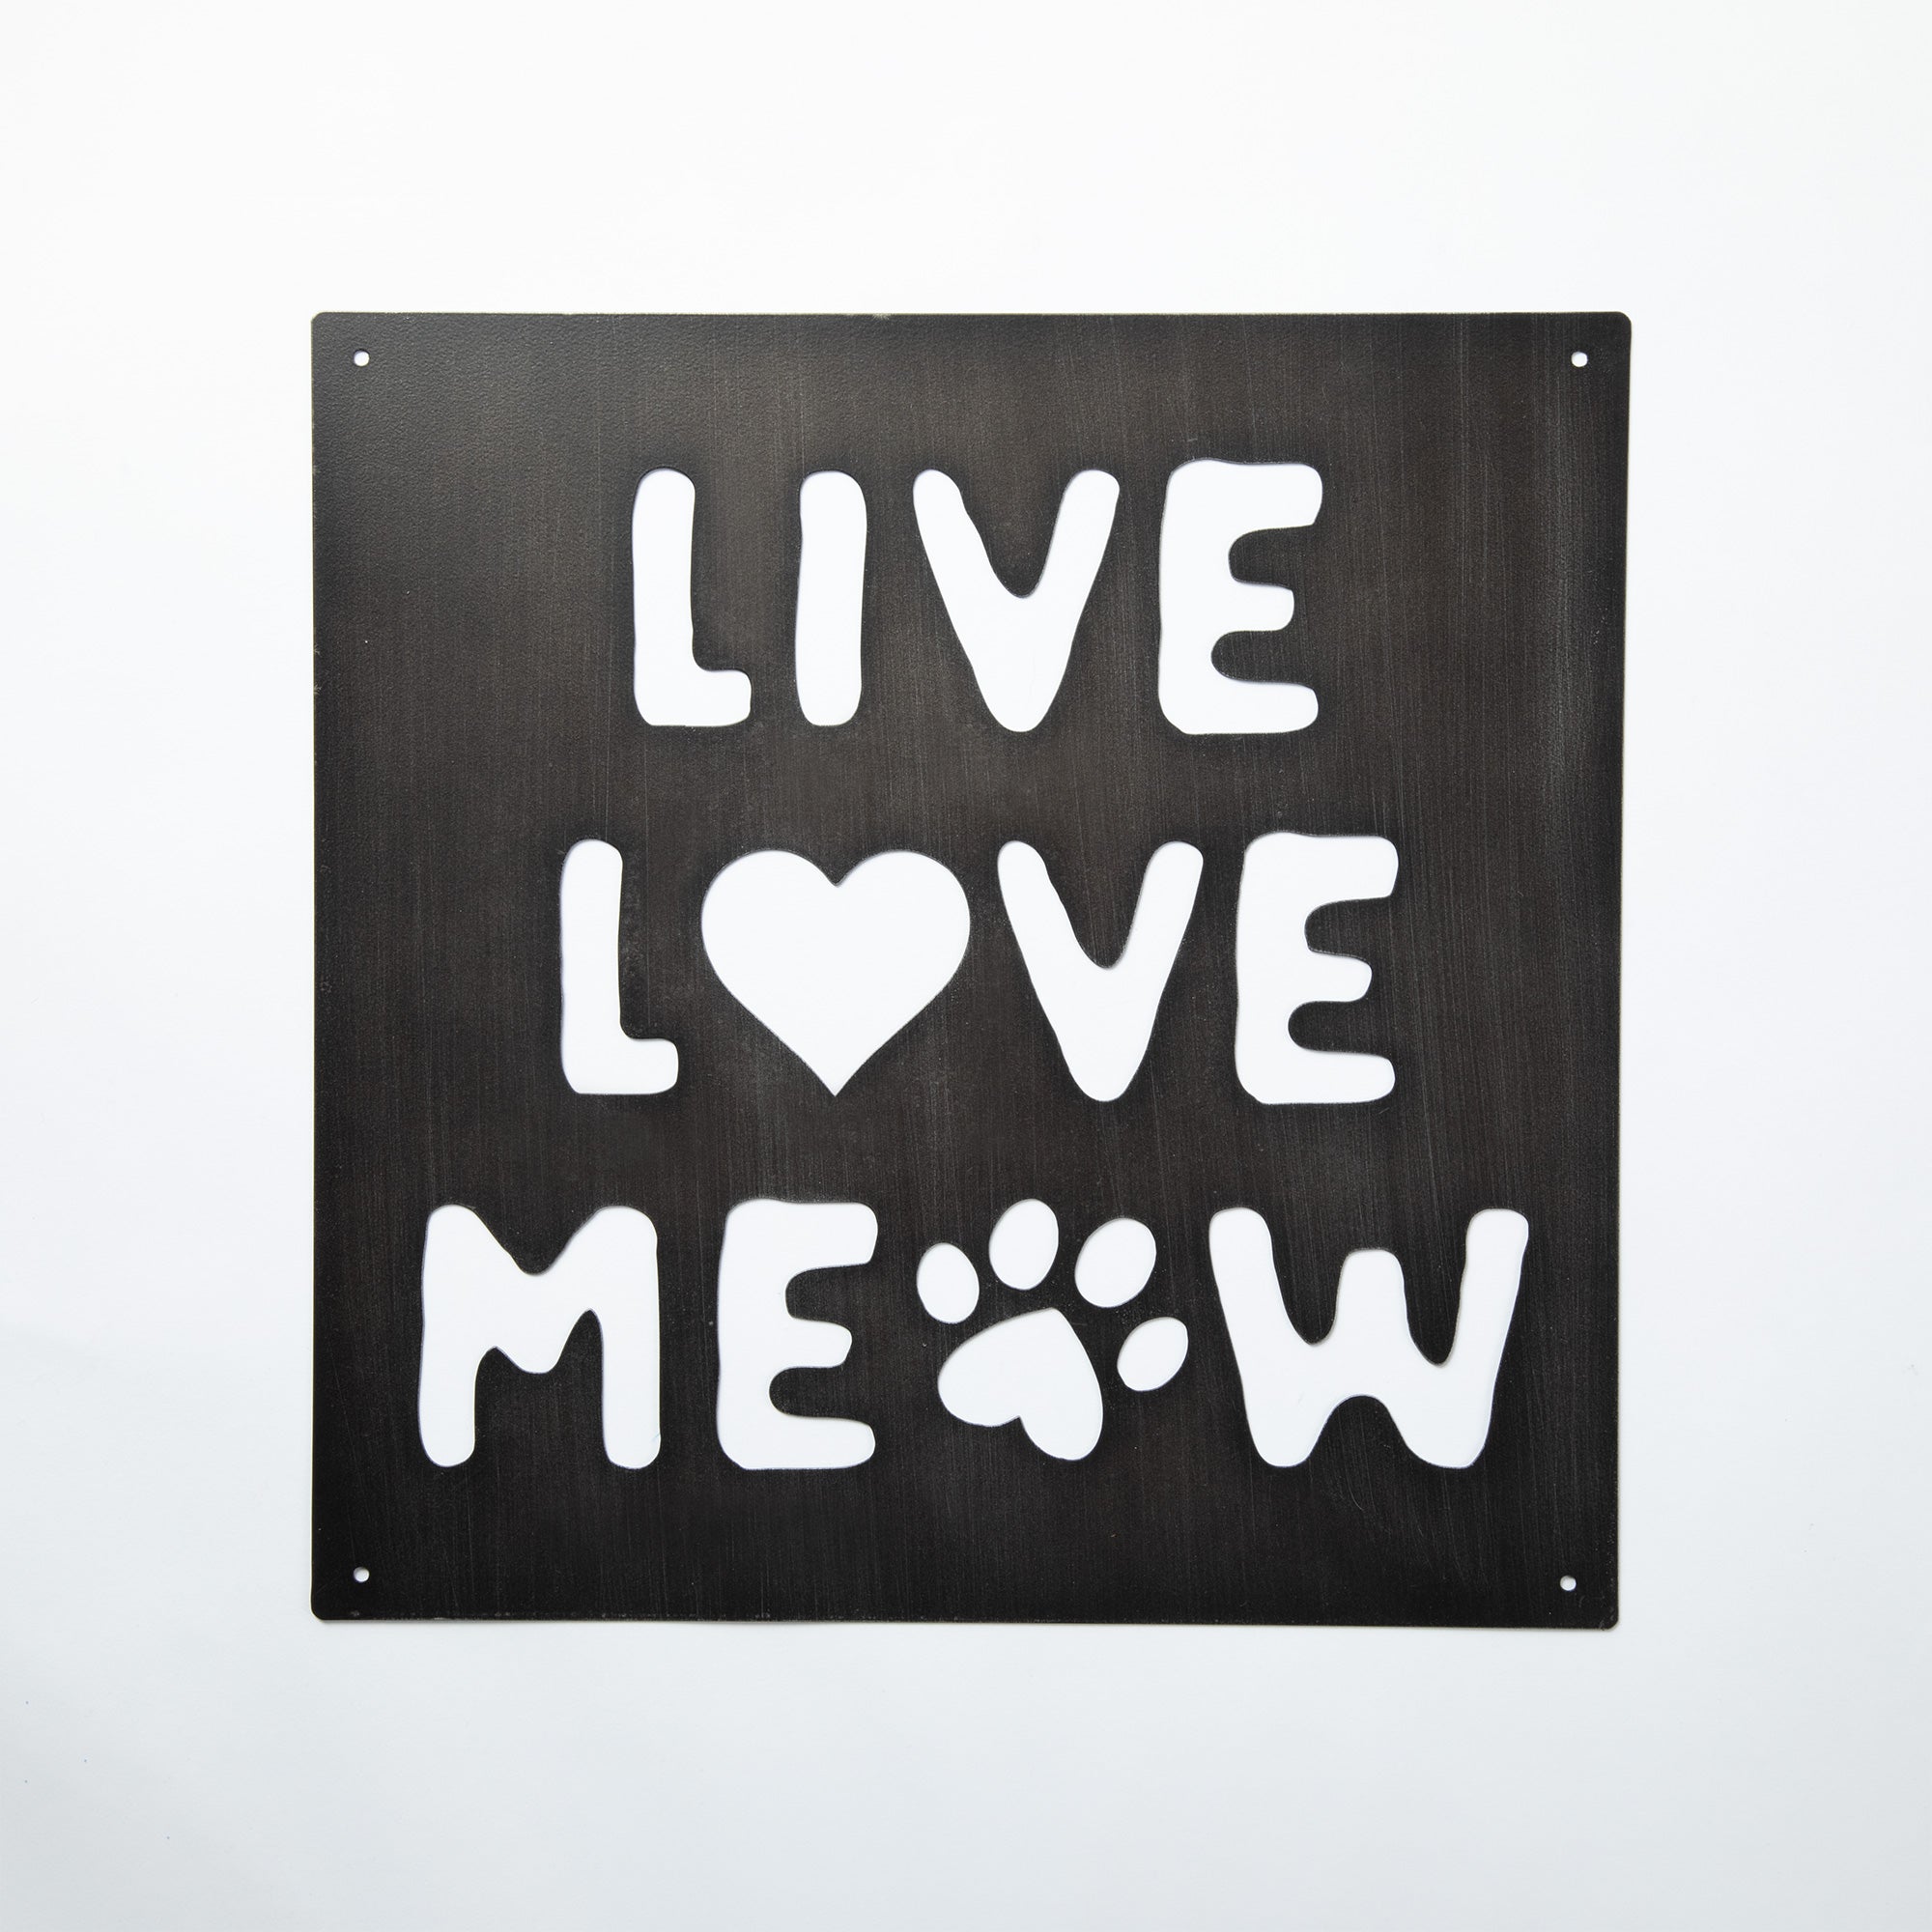 Cat Lover Outdoor Wall Decor Sign - Live Love Meow